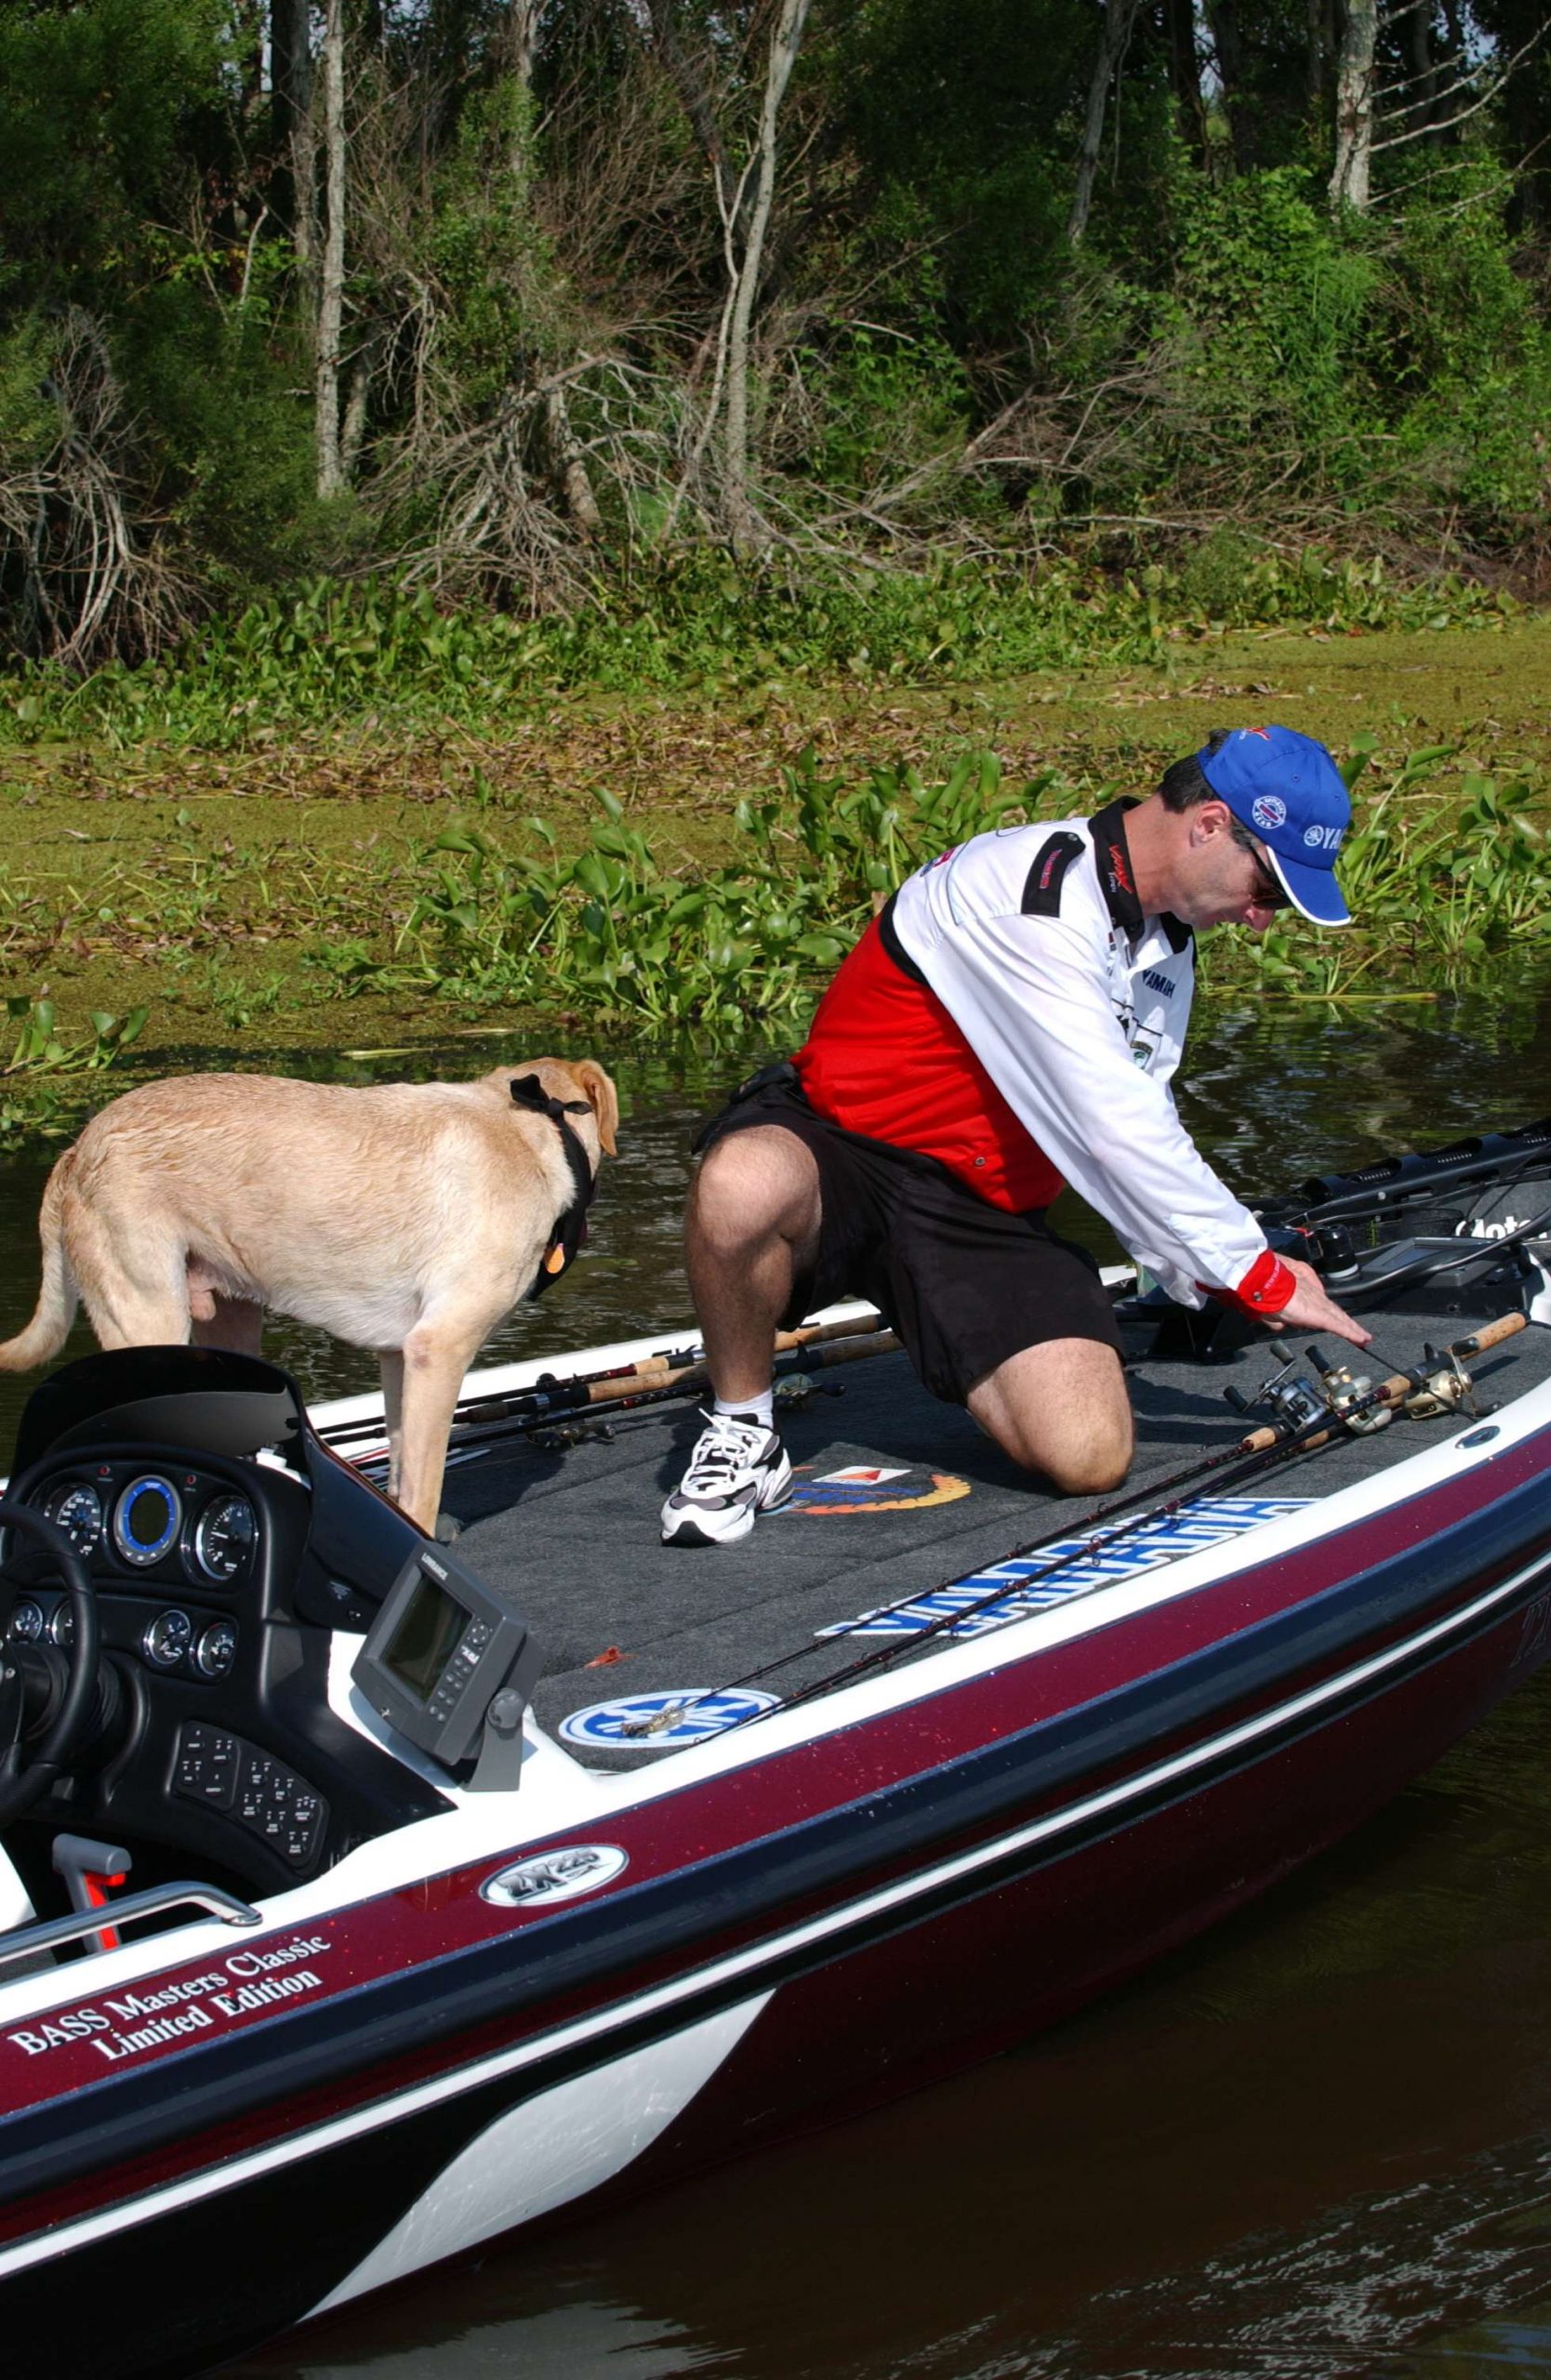 In 2003, he was known as the angler who would fish with his Labrador Barkley.
